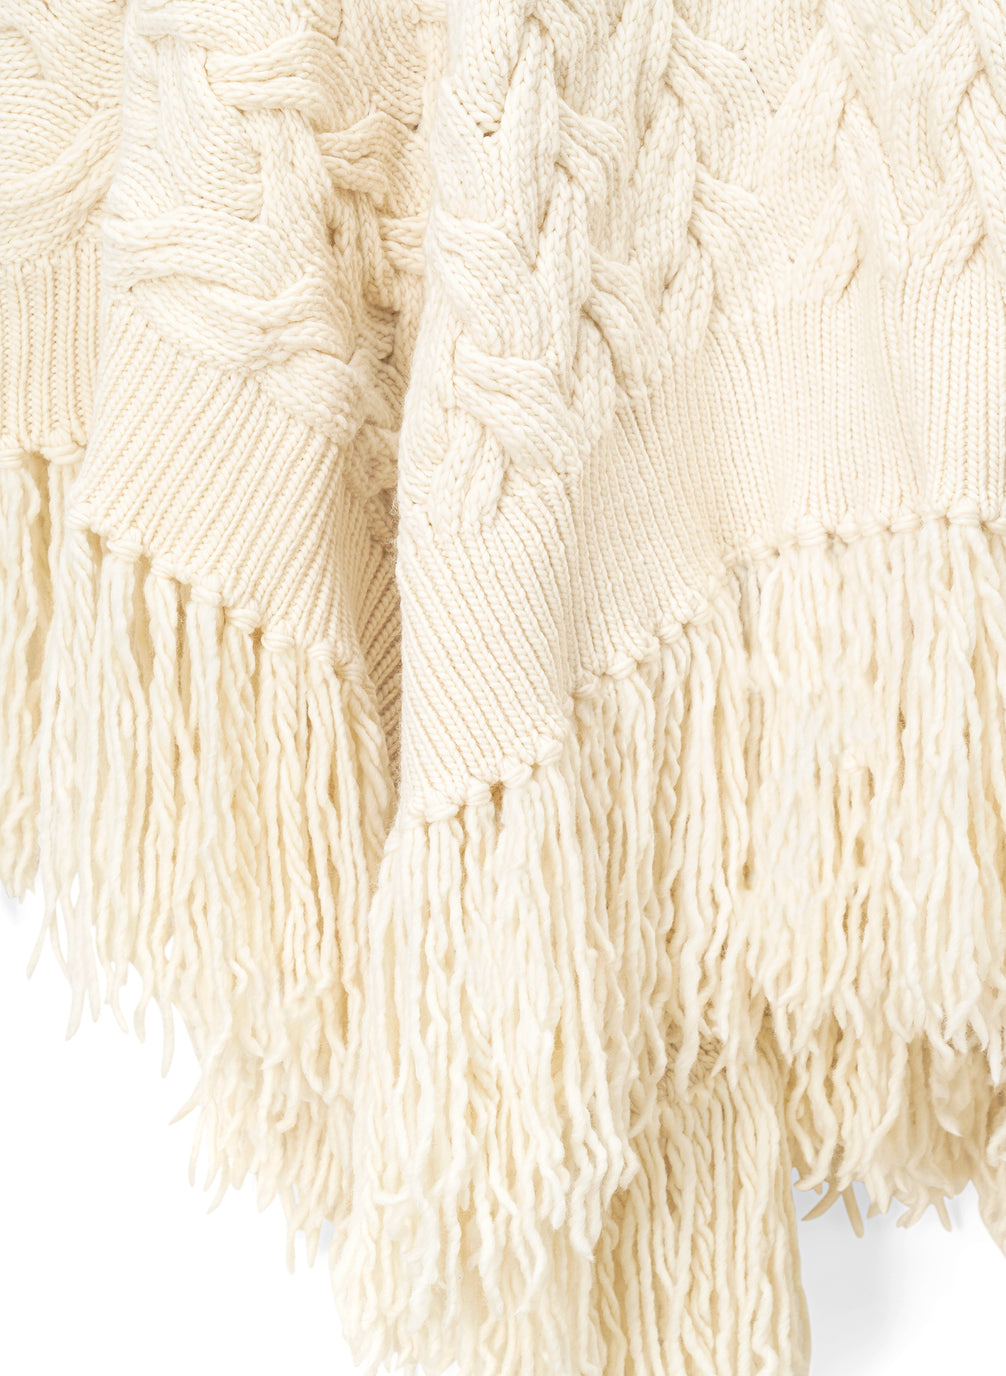 detail view of woman wearing cream cable knit poncho with fringe